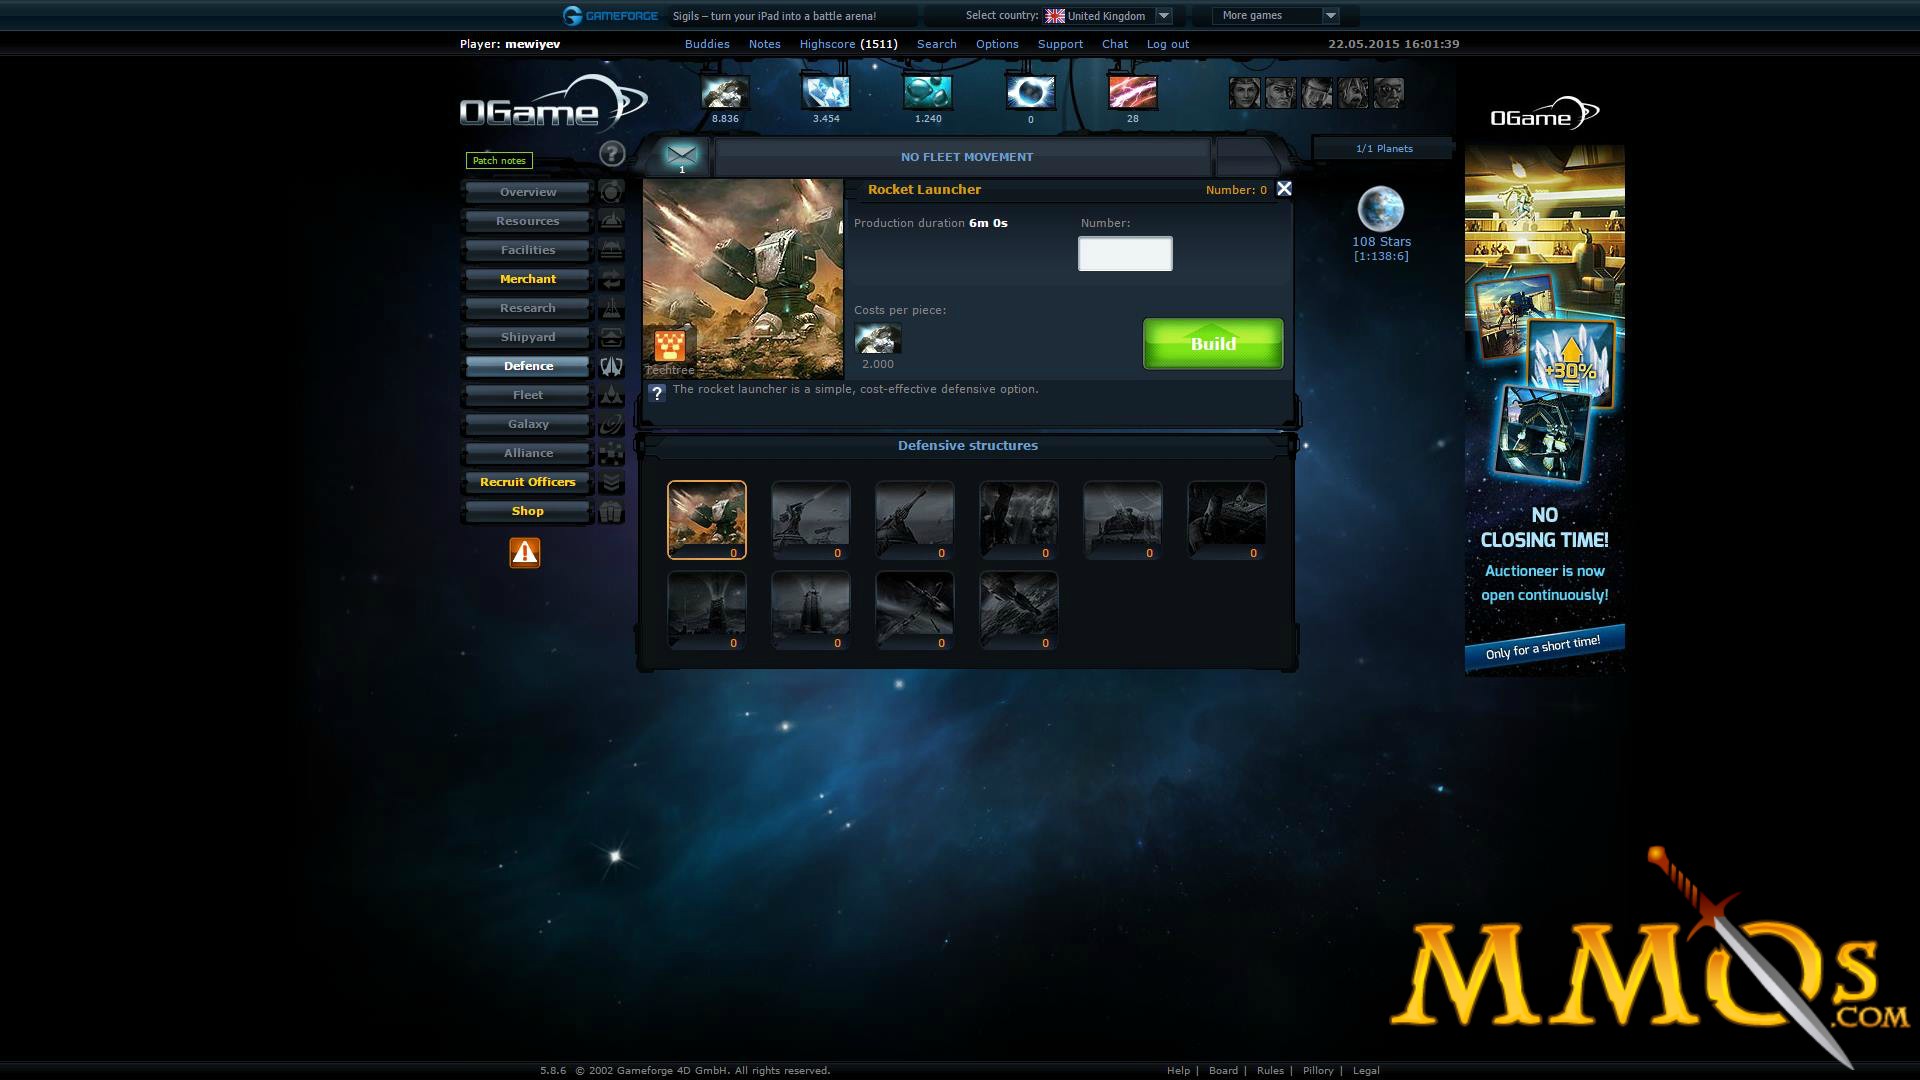 MMO OGame leaps onto mobile devices